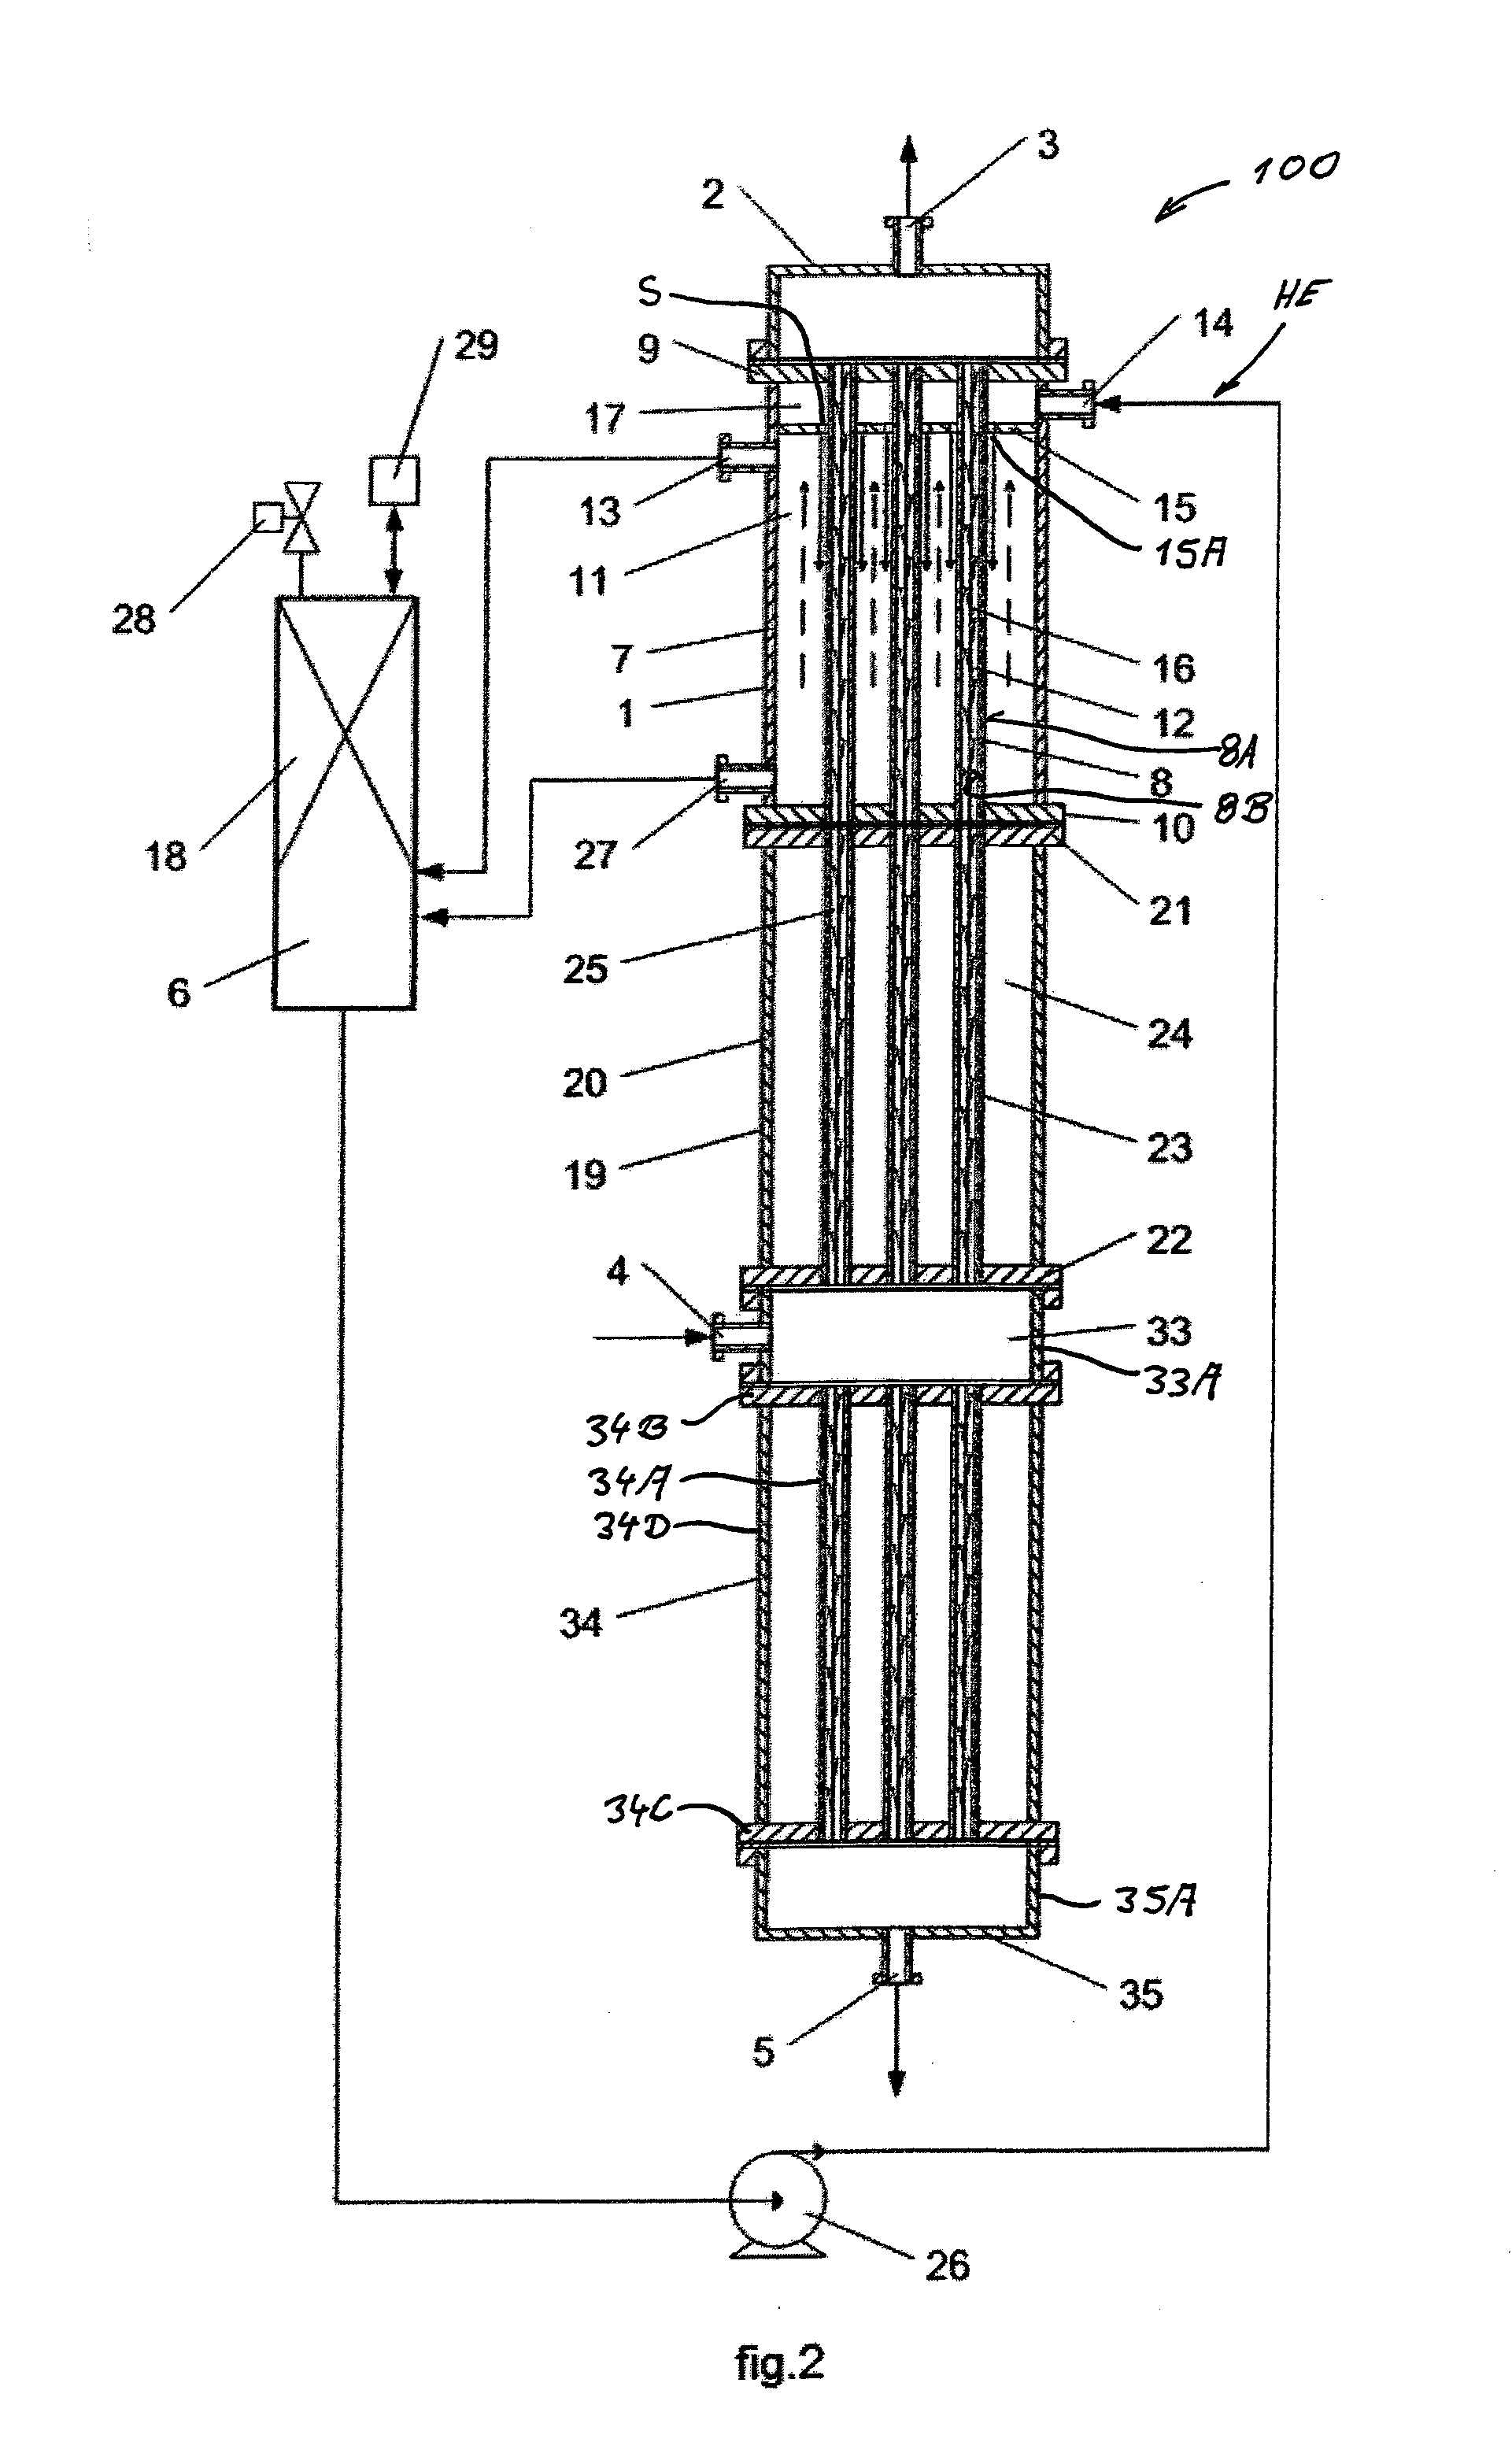 Rectification Tower with Internal Heat and Mass Exchange and Method for Separation of Multi-Component Mixtures into Fractions Using a Rectification Tower with an Internal Heat and Mass Exchange